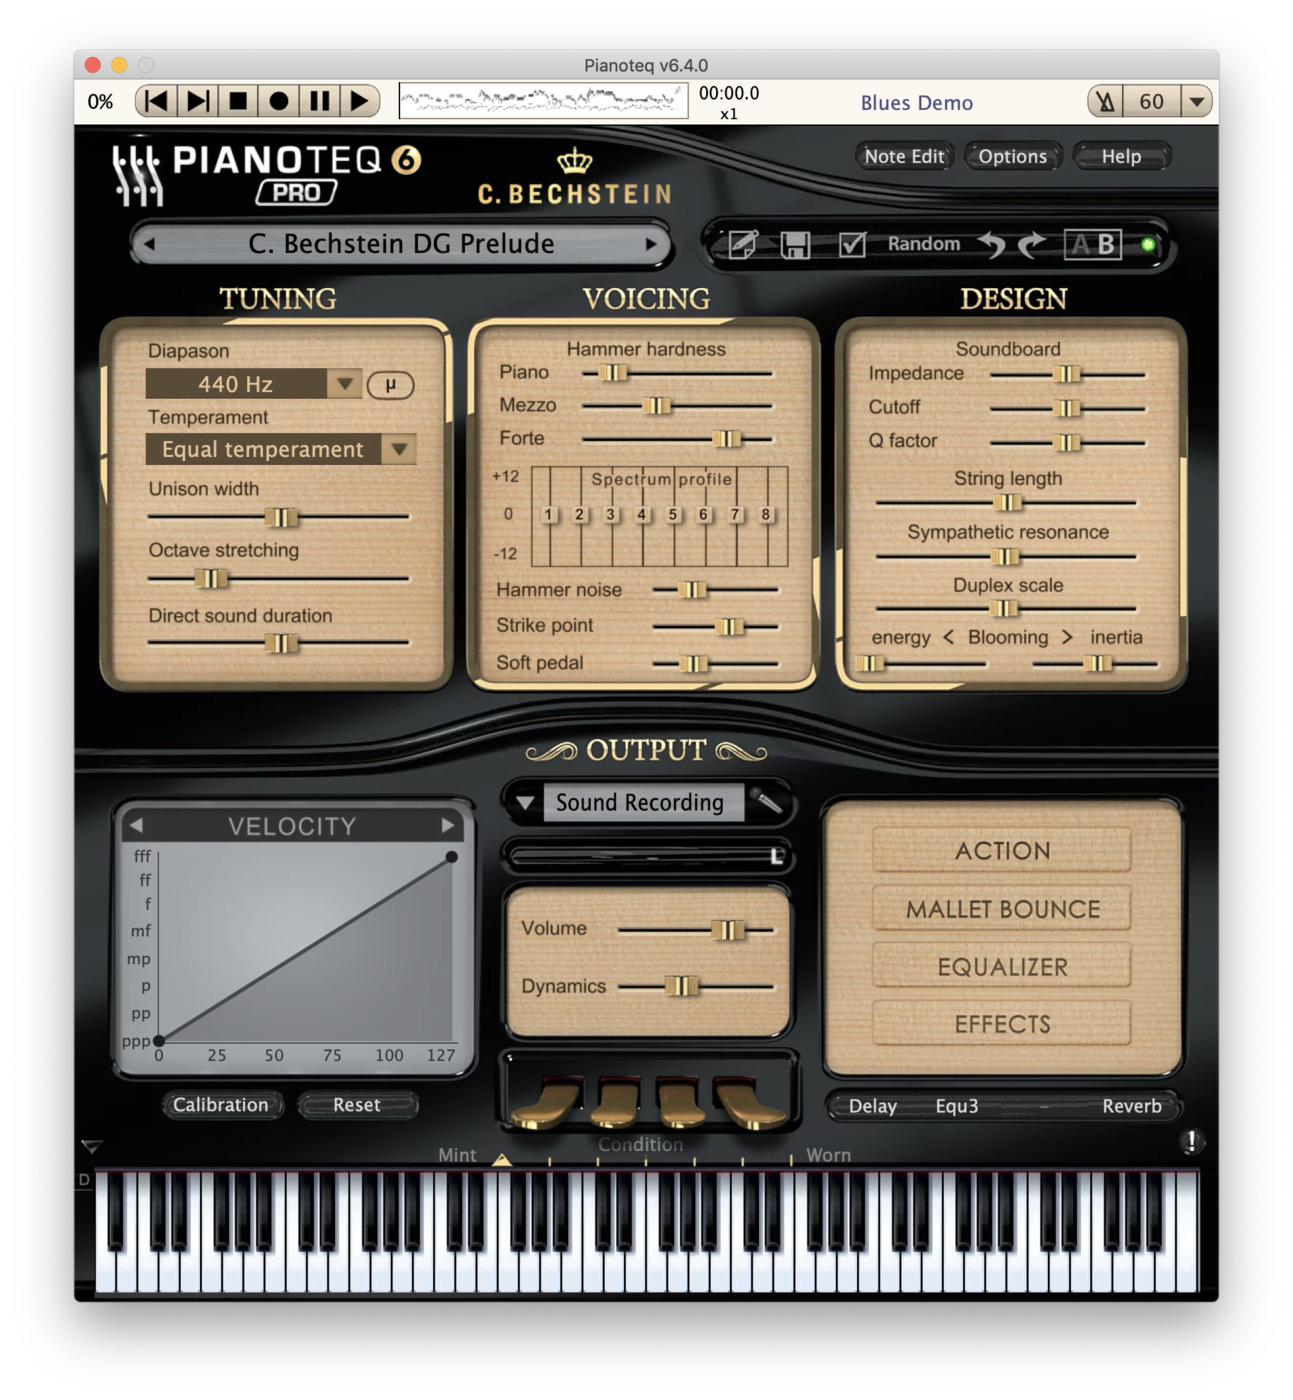 C. Bechstein Digital Grand add-on for Pianoteq